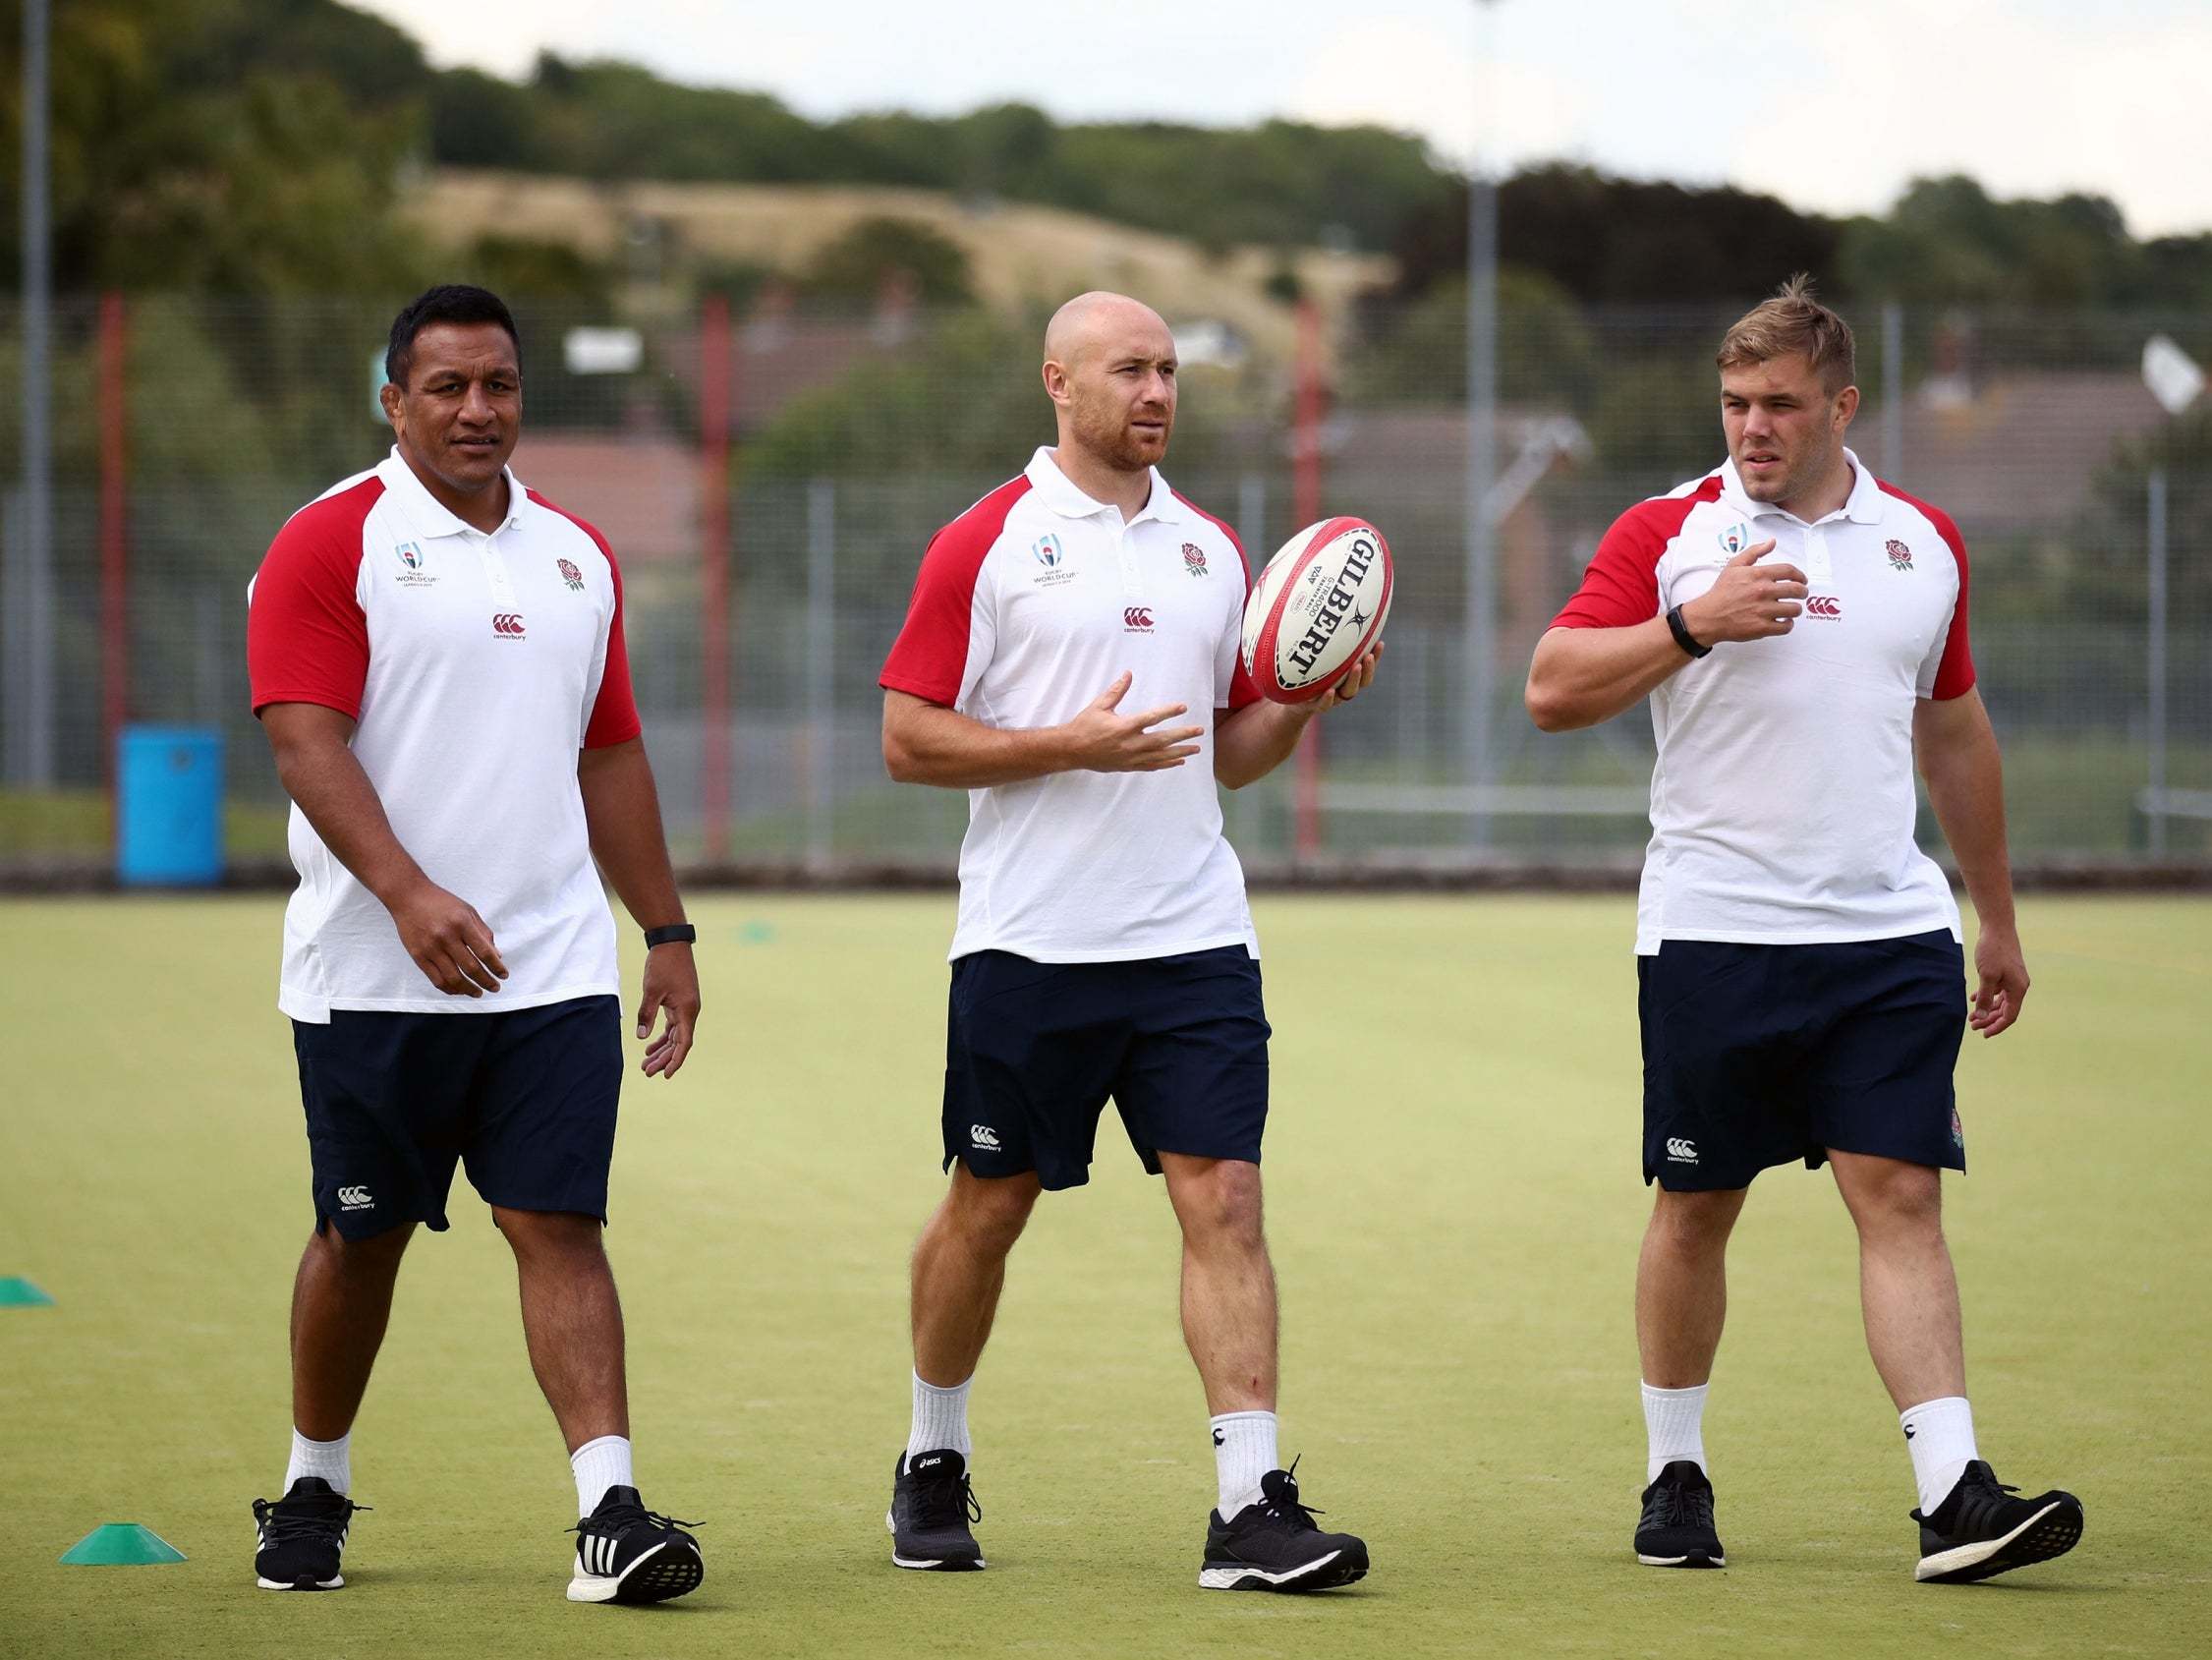 england rugby starting lineup